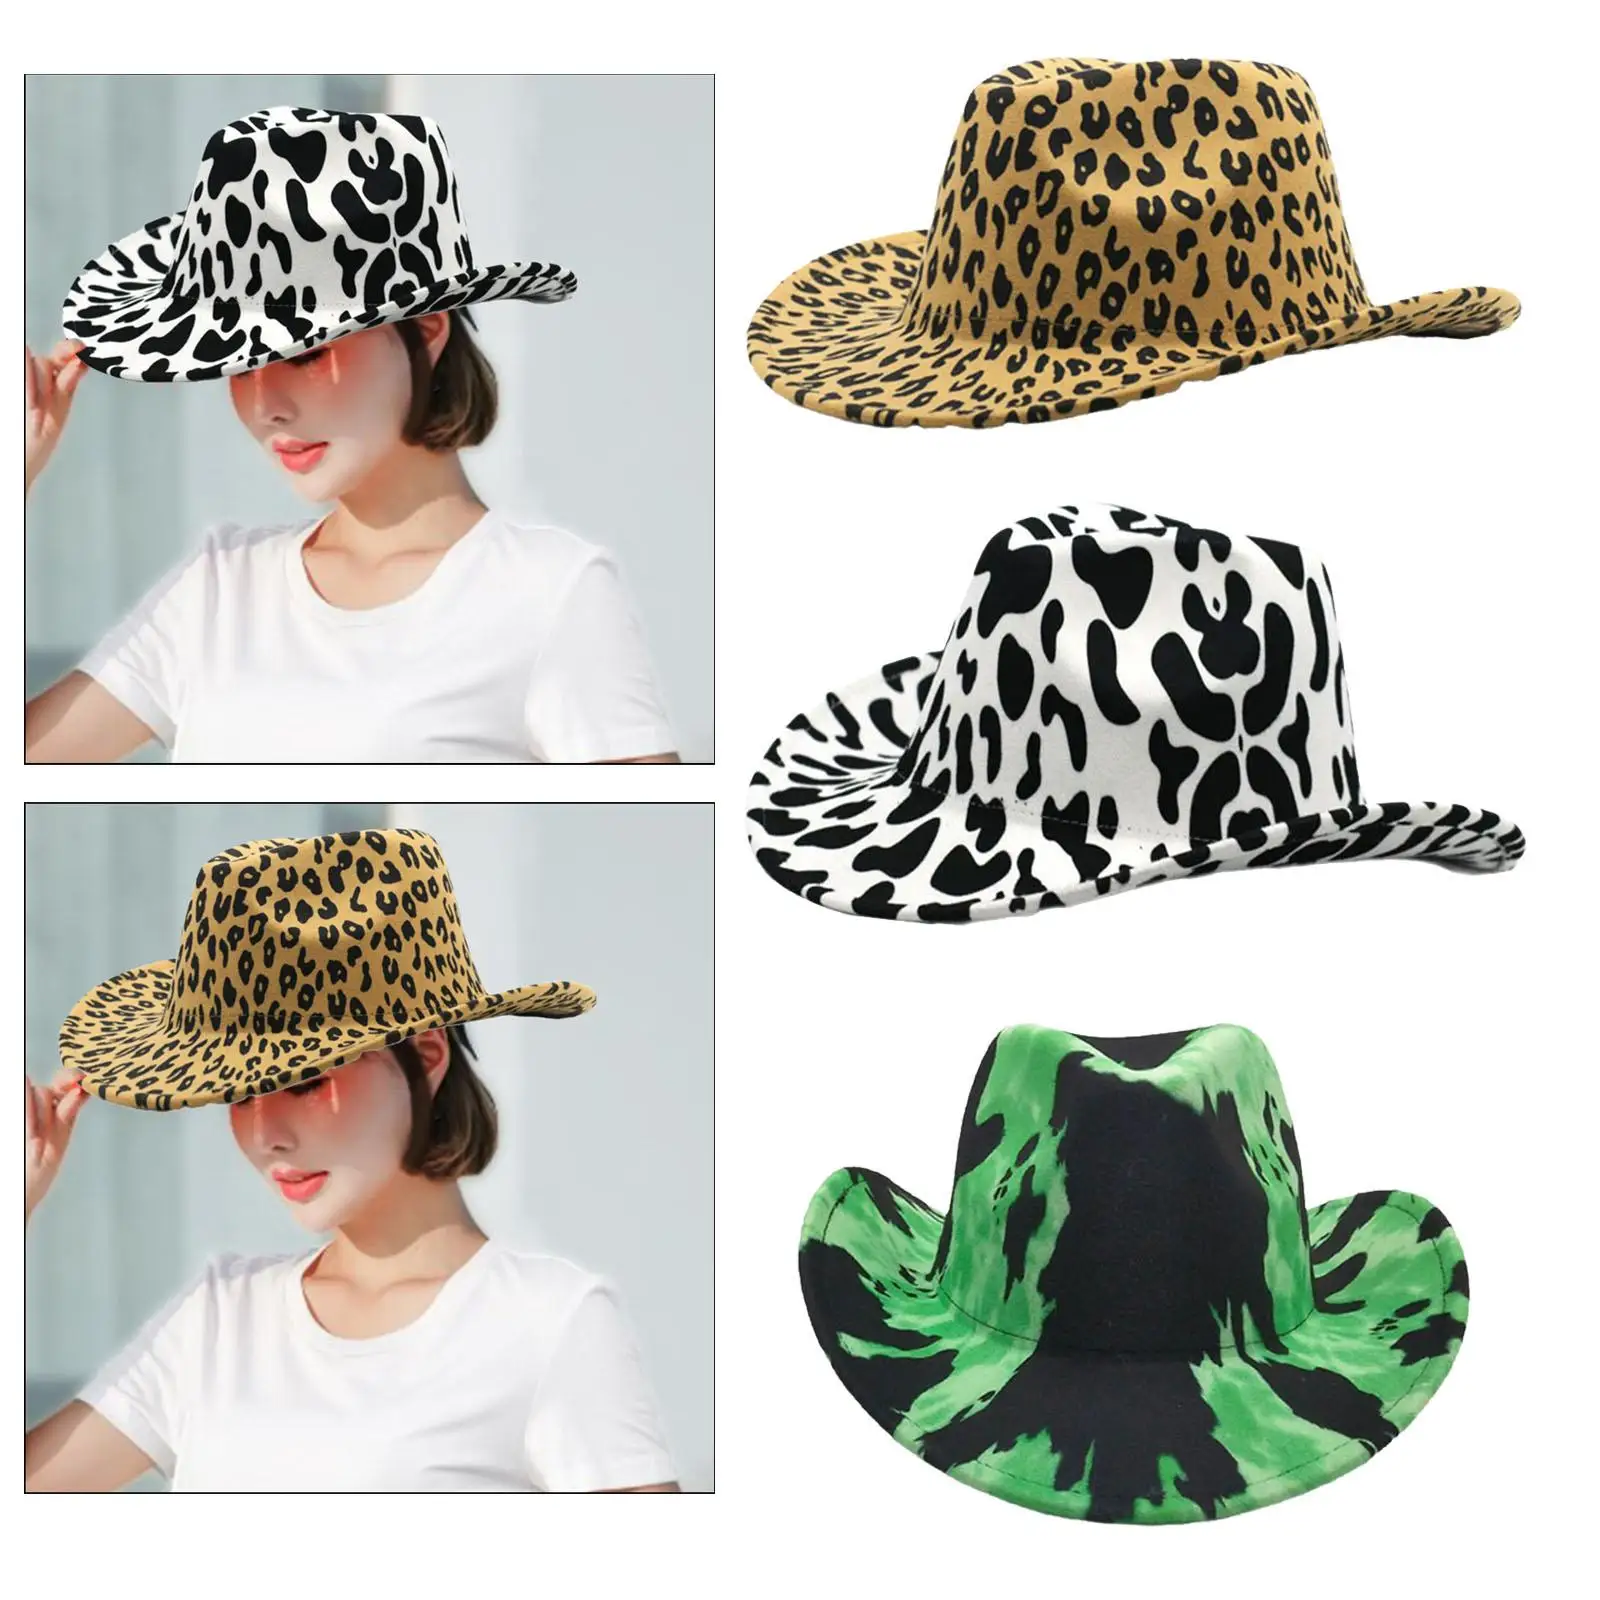 Cowboy Hat Cow Print Party Hats Costume Accessories Wide Brim Hats Womens Hats with Brim for Festival Halloween Adults Men Women